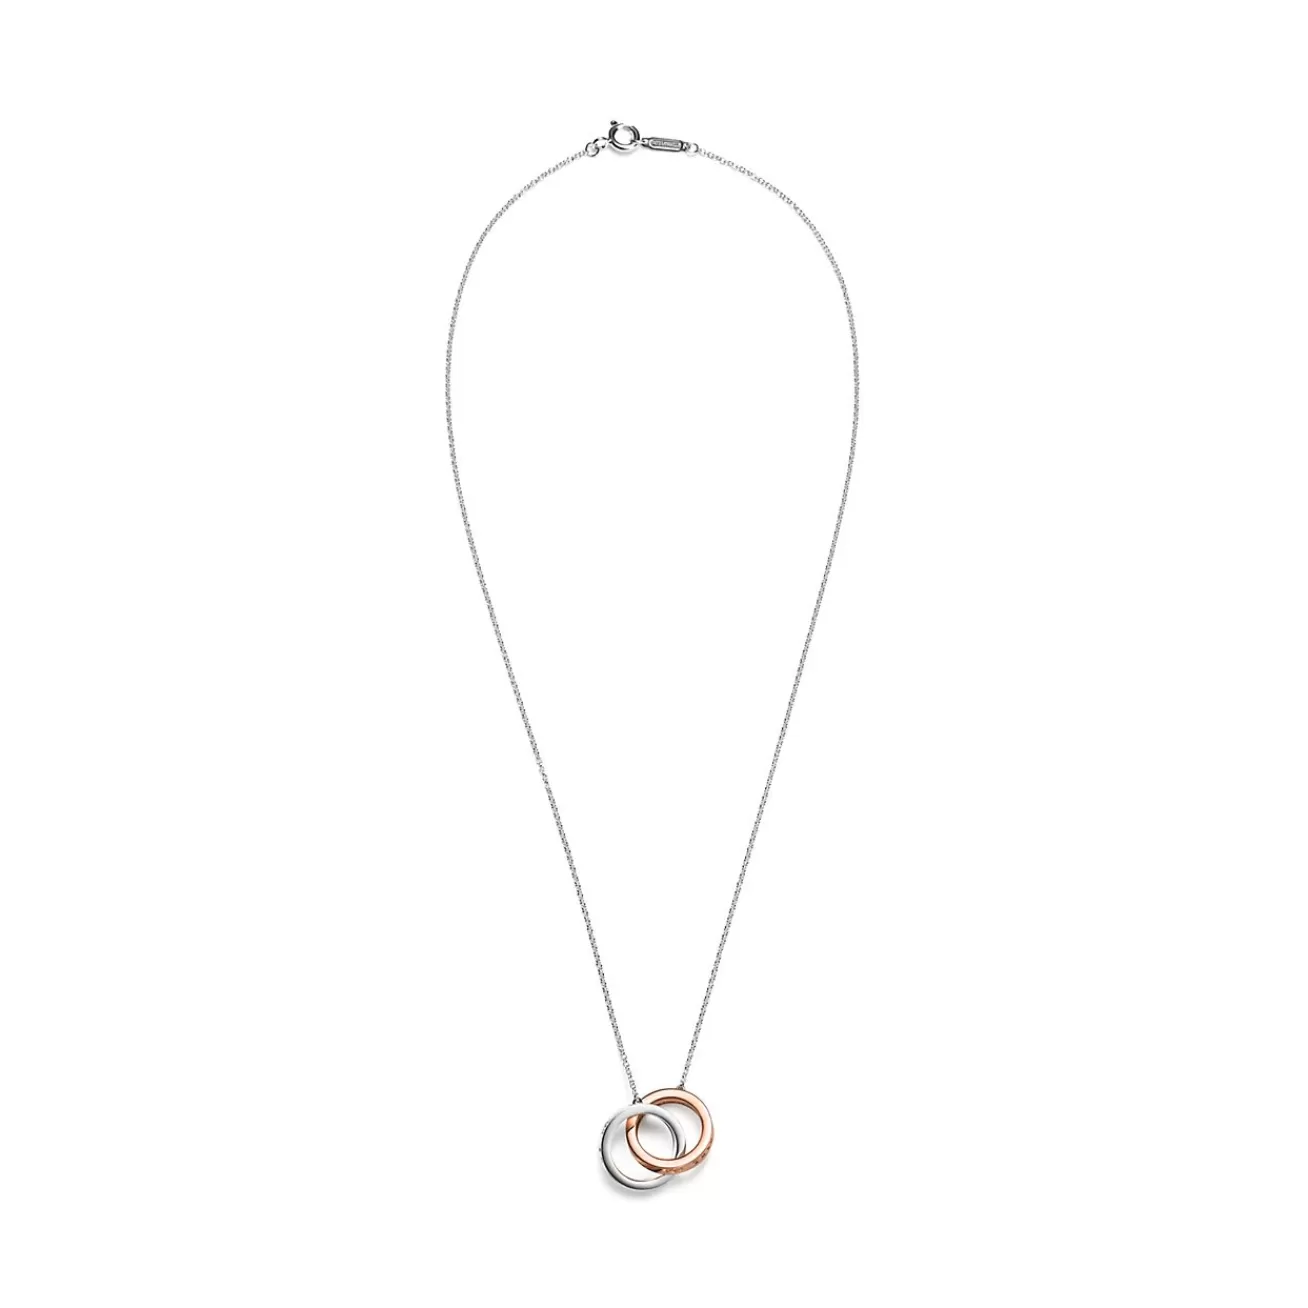 Tiffany & Co. Tiffany 1837® interlocking circles pendant in sterling silver and 18k rose gold. | ^ Necklaces & Pendants | Gifts for Her